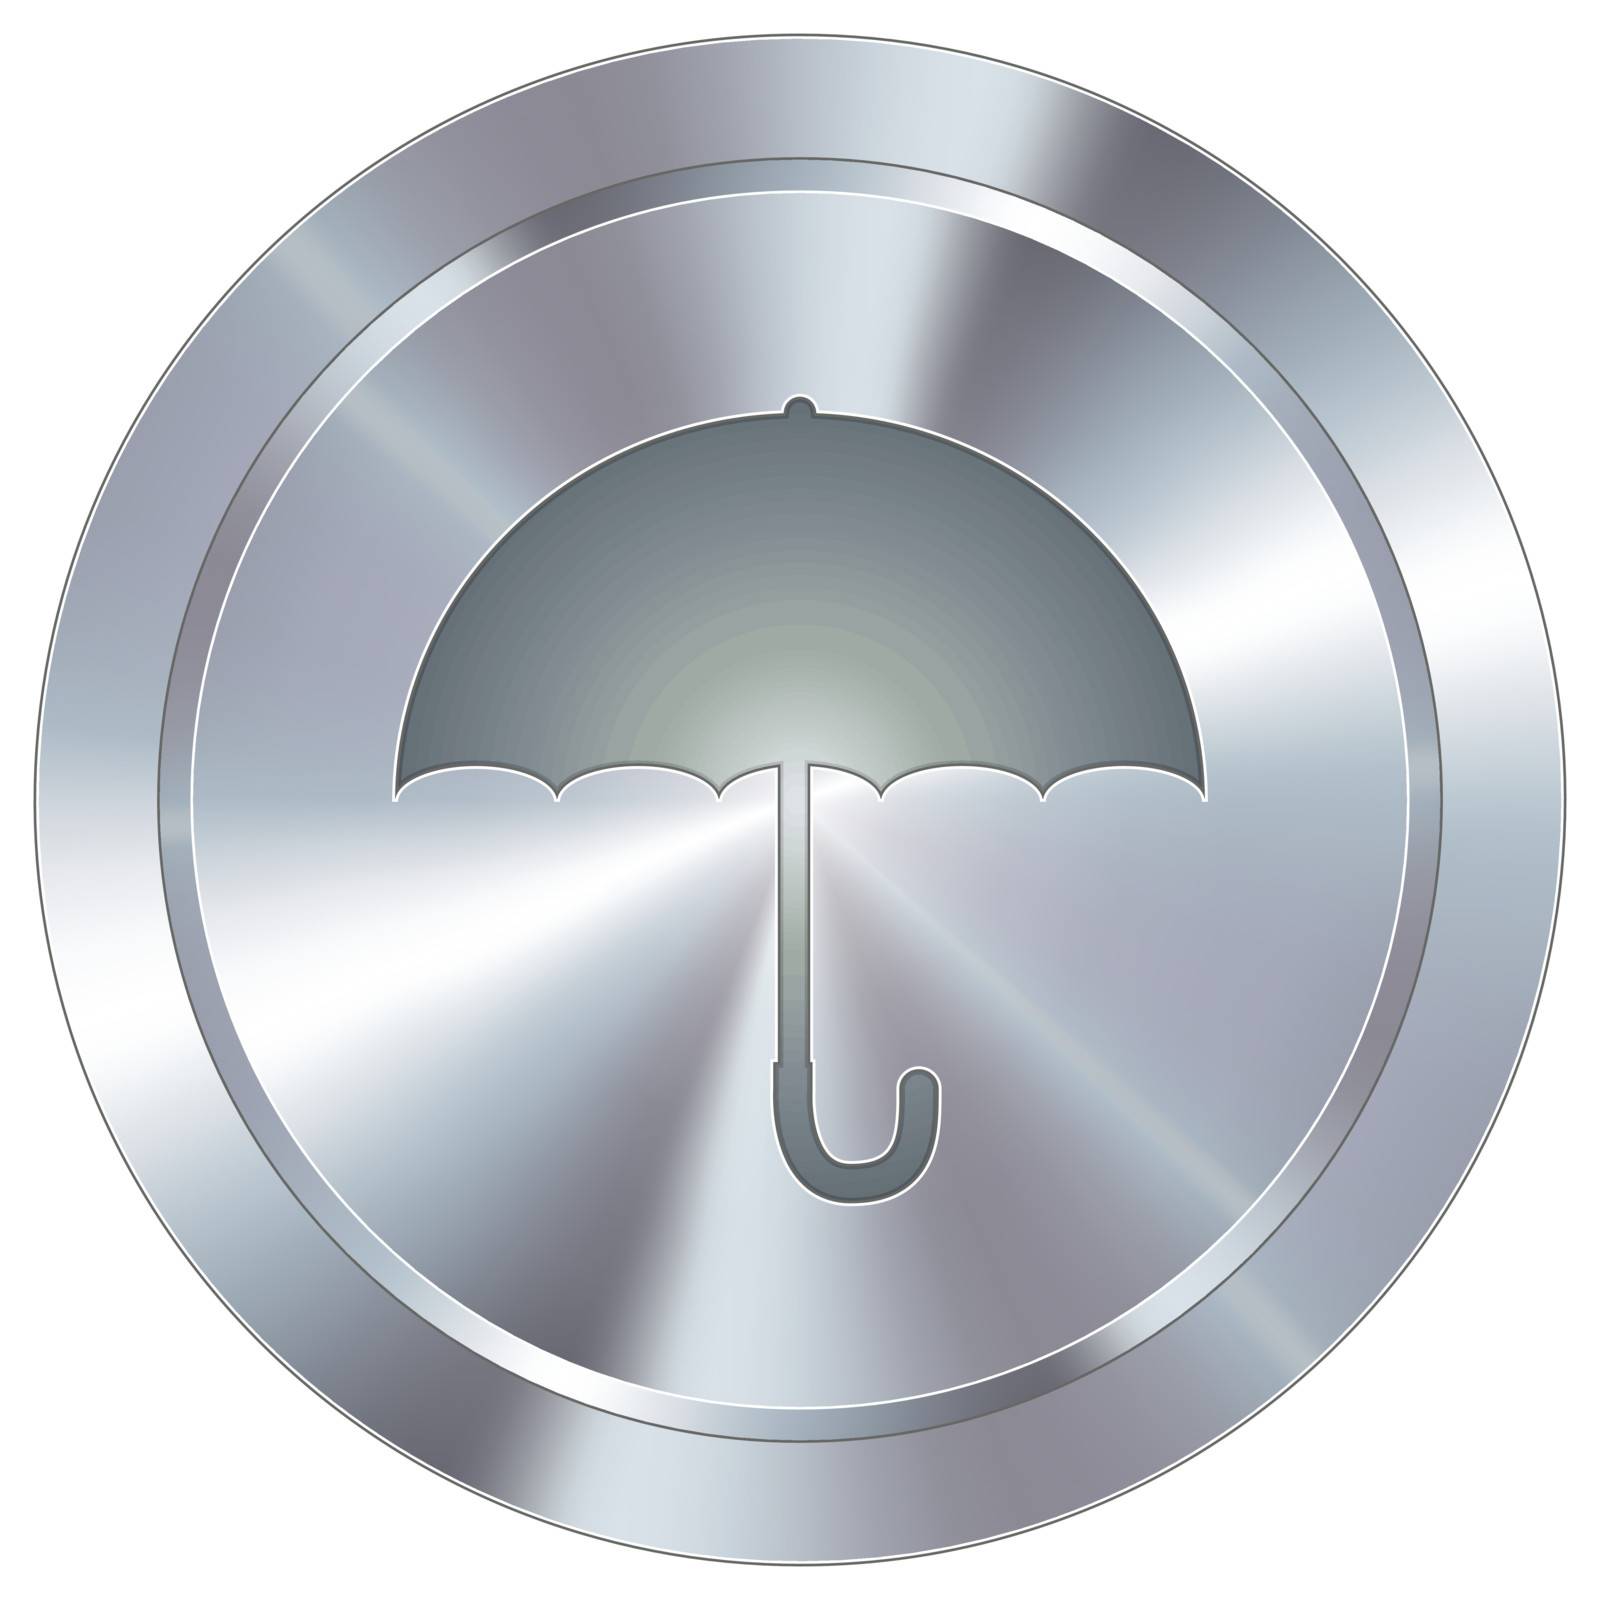 Umbrella or protection icon on round stainless steel modern industrial button